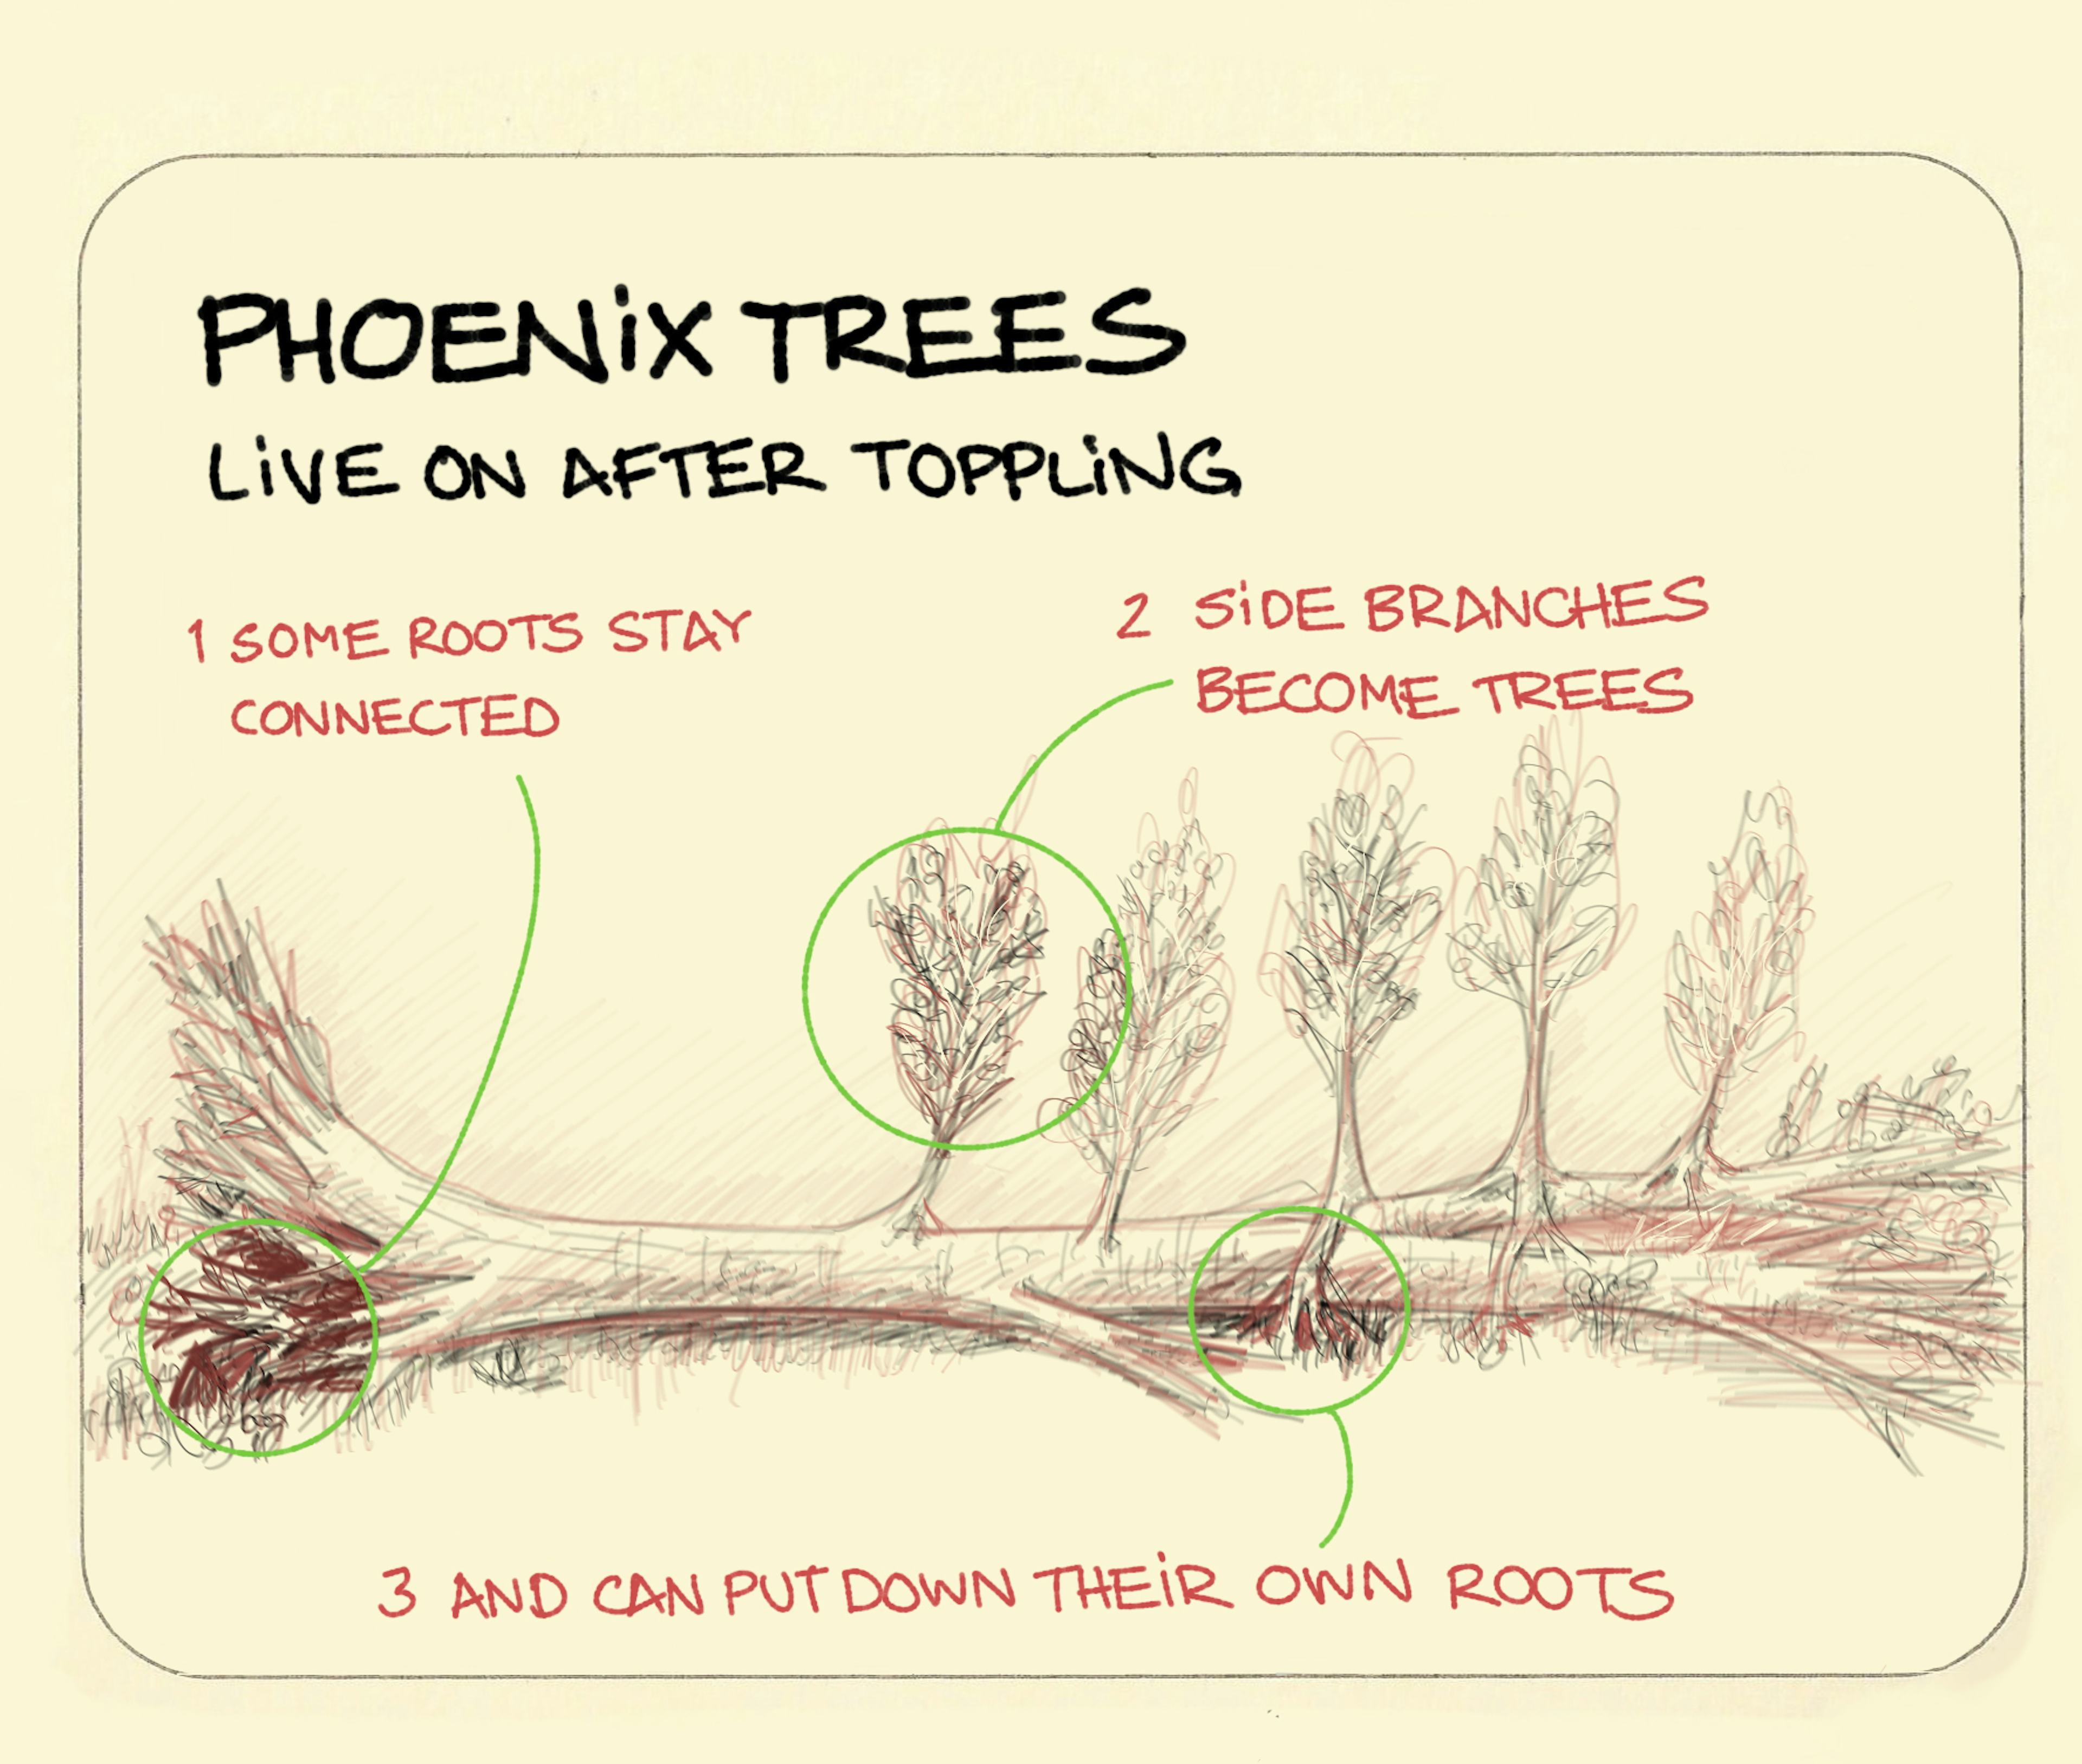 Phoenix tree illustration with a toppled tree shown pencil-sketch style with its roots still connected at one end, side branches along the trunk becoming trees in their own right, and one putting down roots